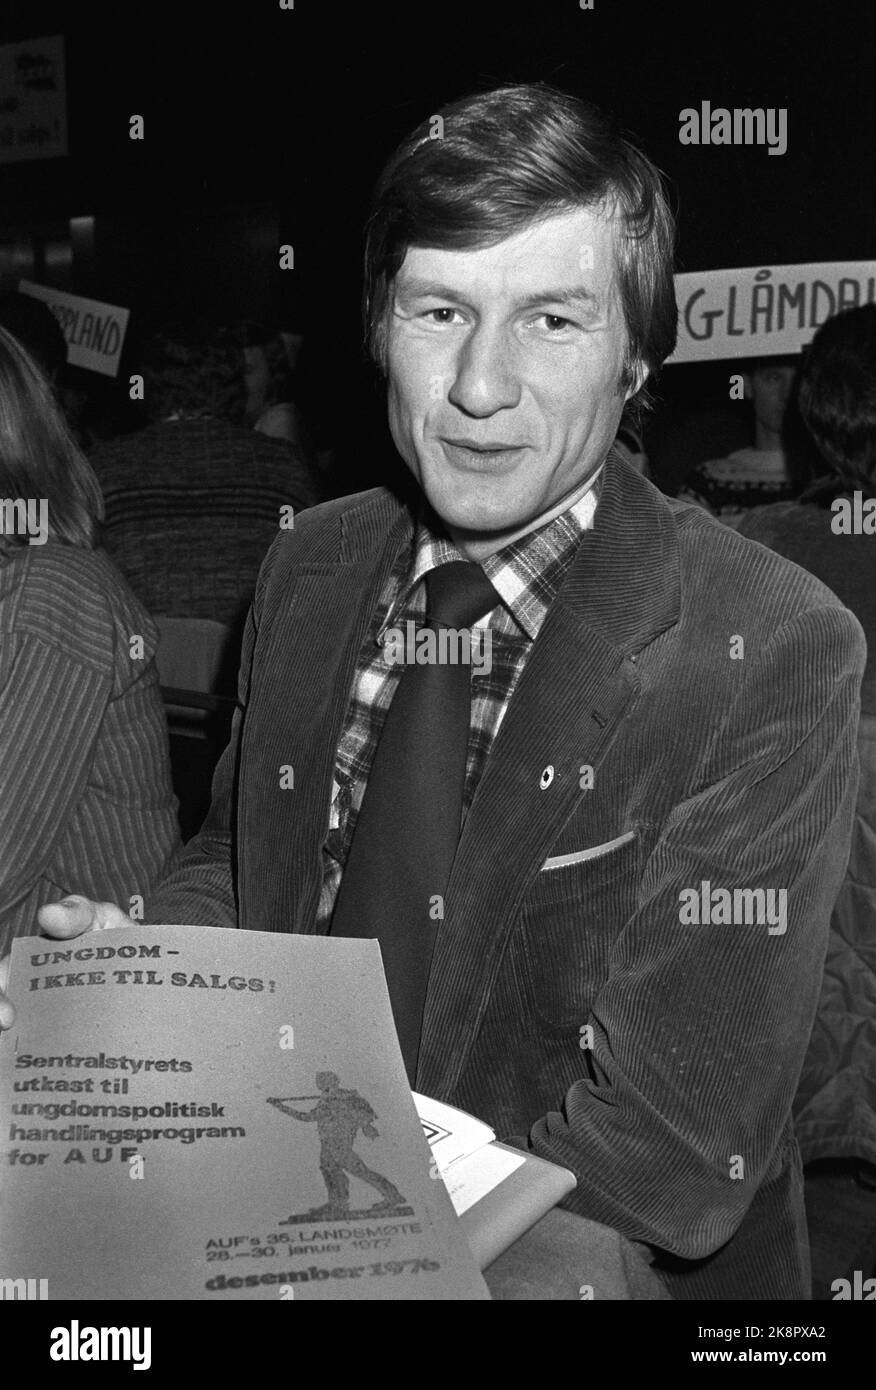 Oslo January 30, 1977. Thorbjørn Jagland from Lier in Buskerud was elected new chairman of the workers' youth county at the national meeting on Sunday. He replaced Sissel Rønbeck. Photo; Oddvar Walle Jensen / NTB / NTB Stock Photo